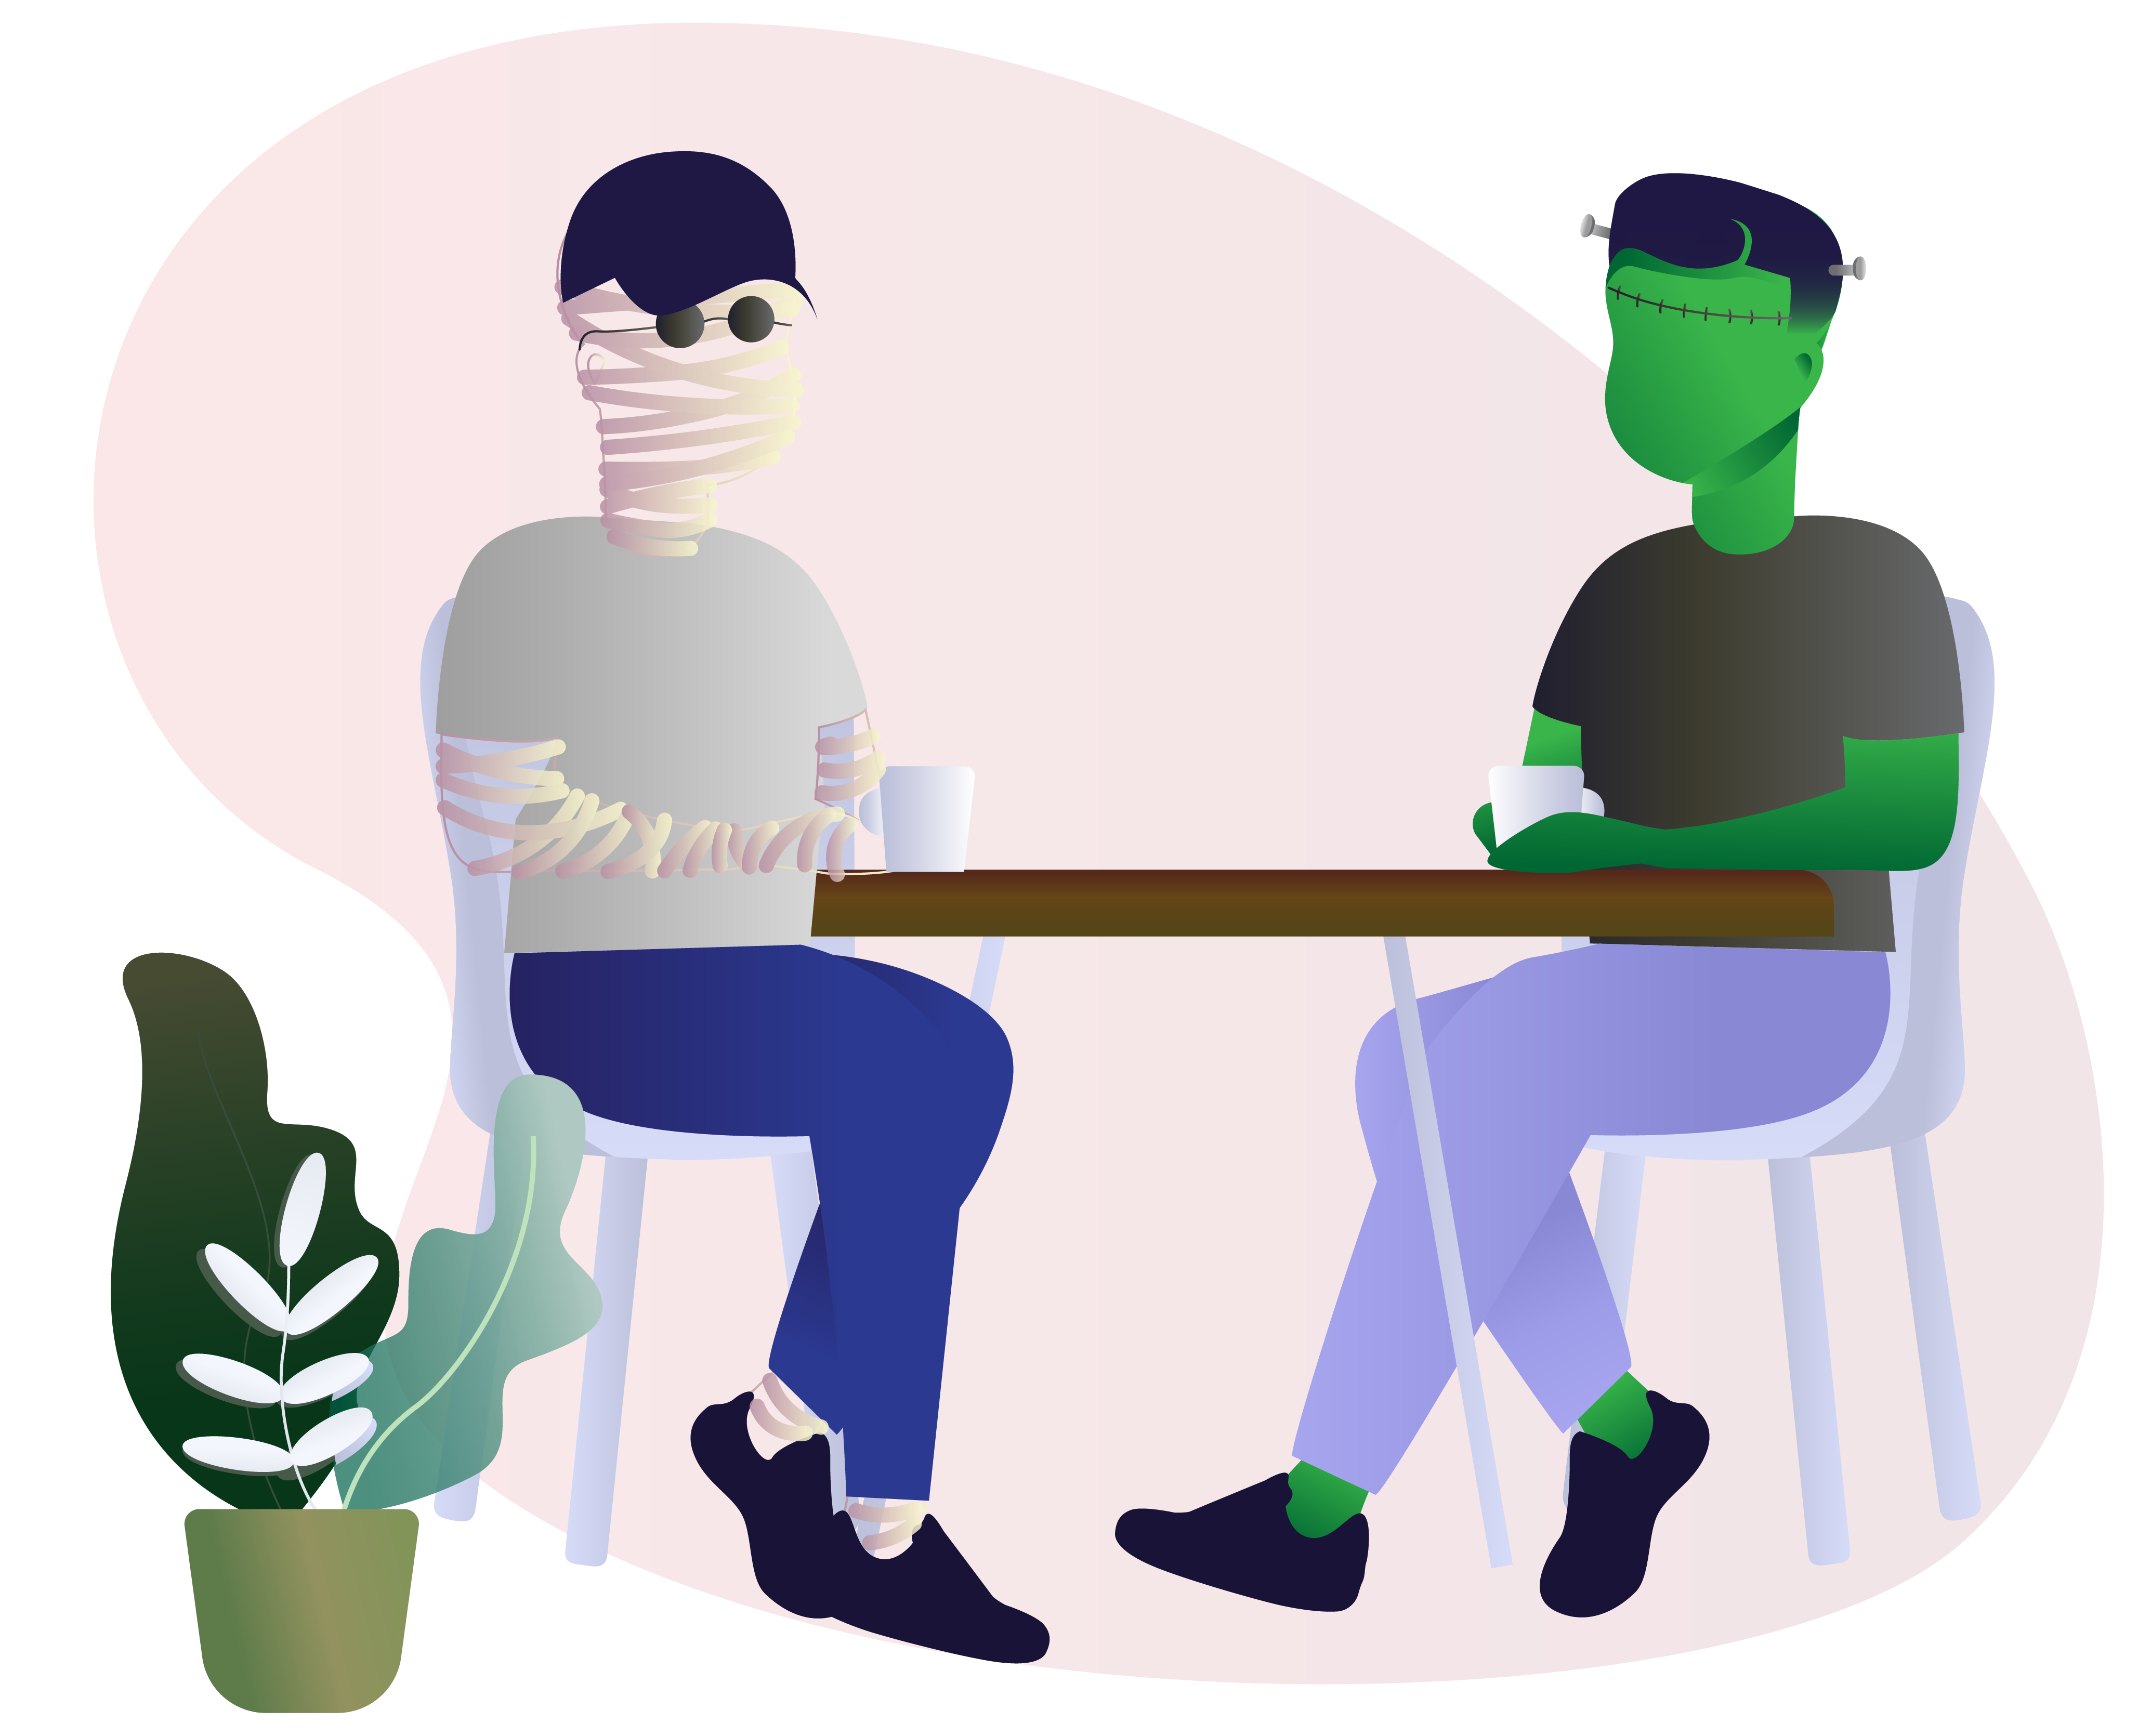 Frankenstein and Invisible Man Sitting at Table Chatting